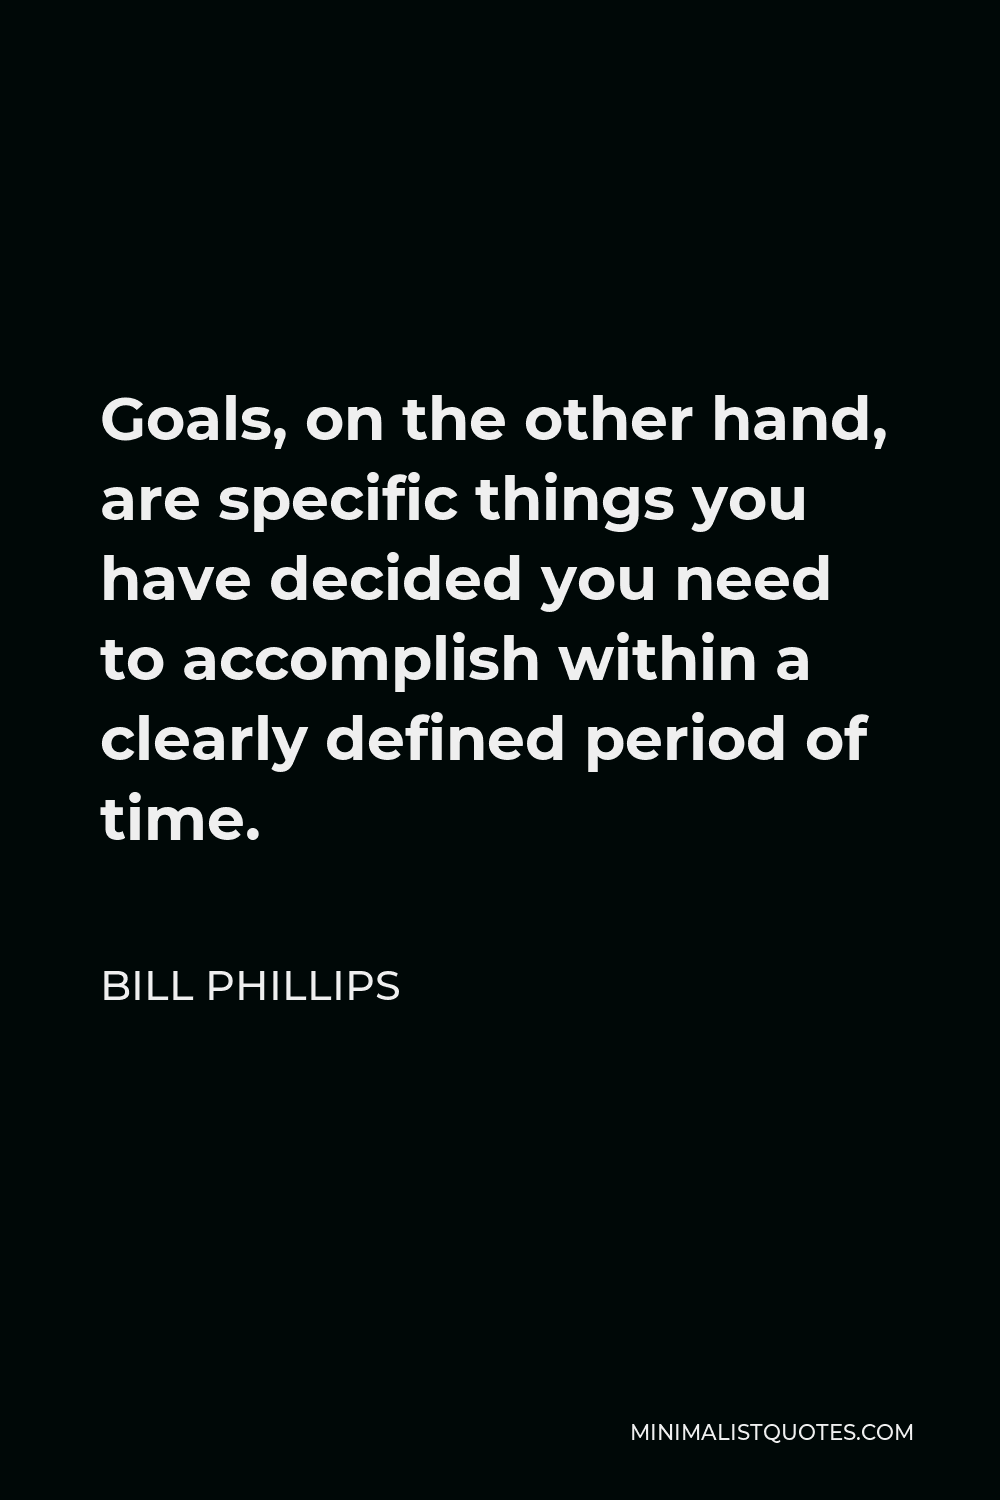 Bill Phillips Quote - Goals, on the other hand, are specific things you have decided you need to accomplish within a clearly defined period of time.